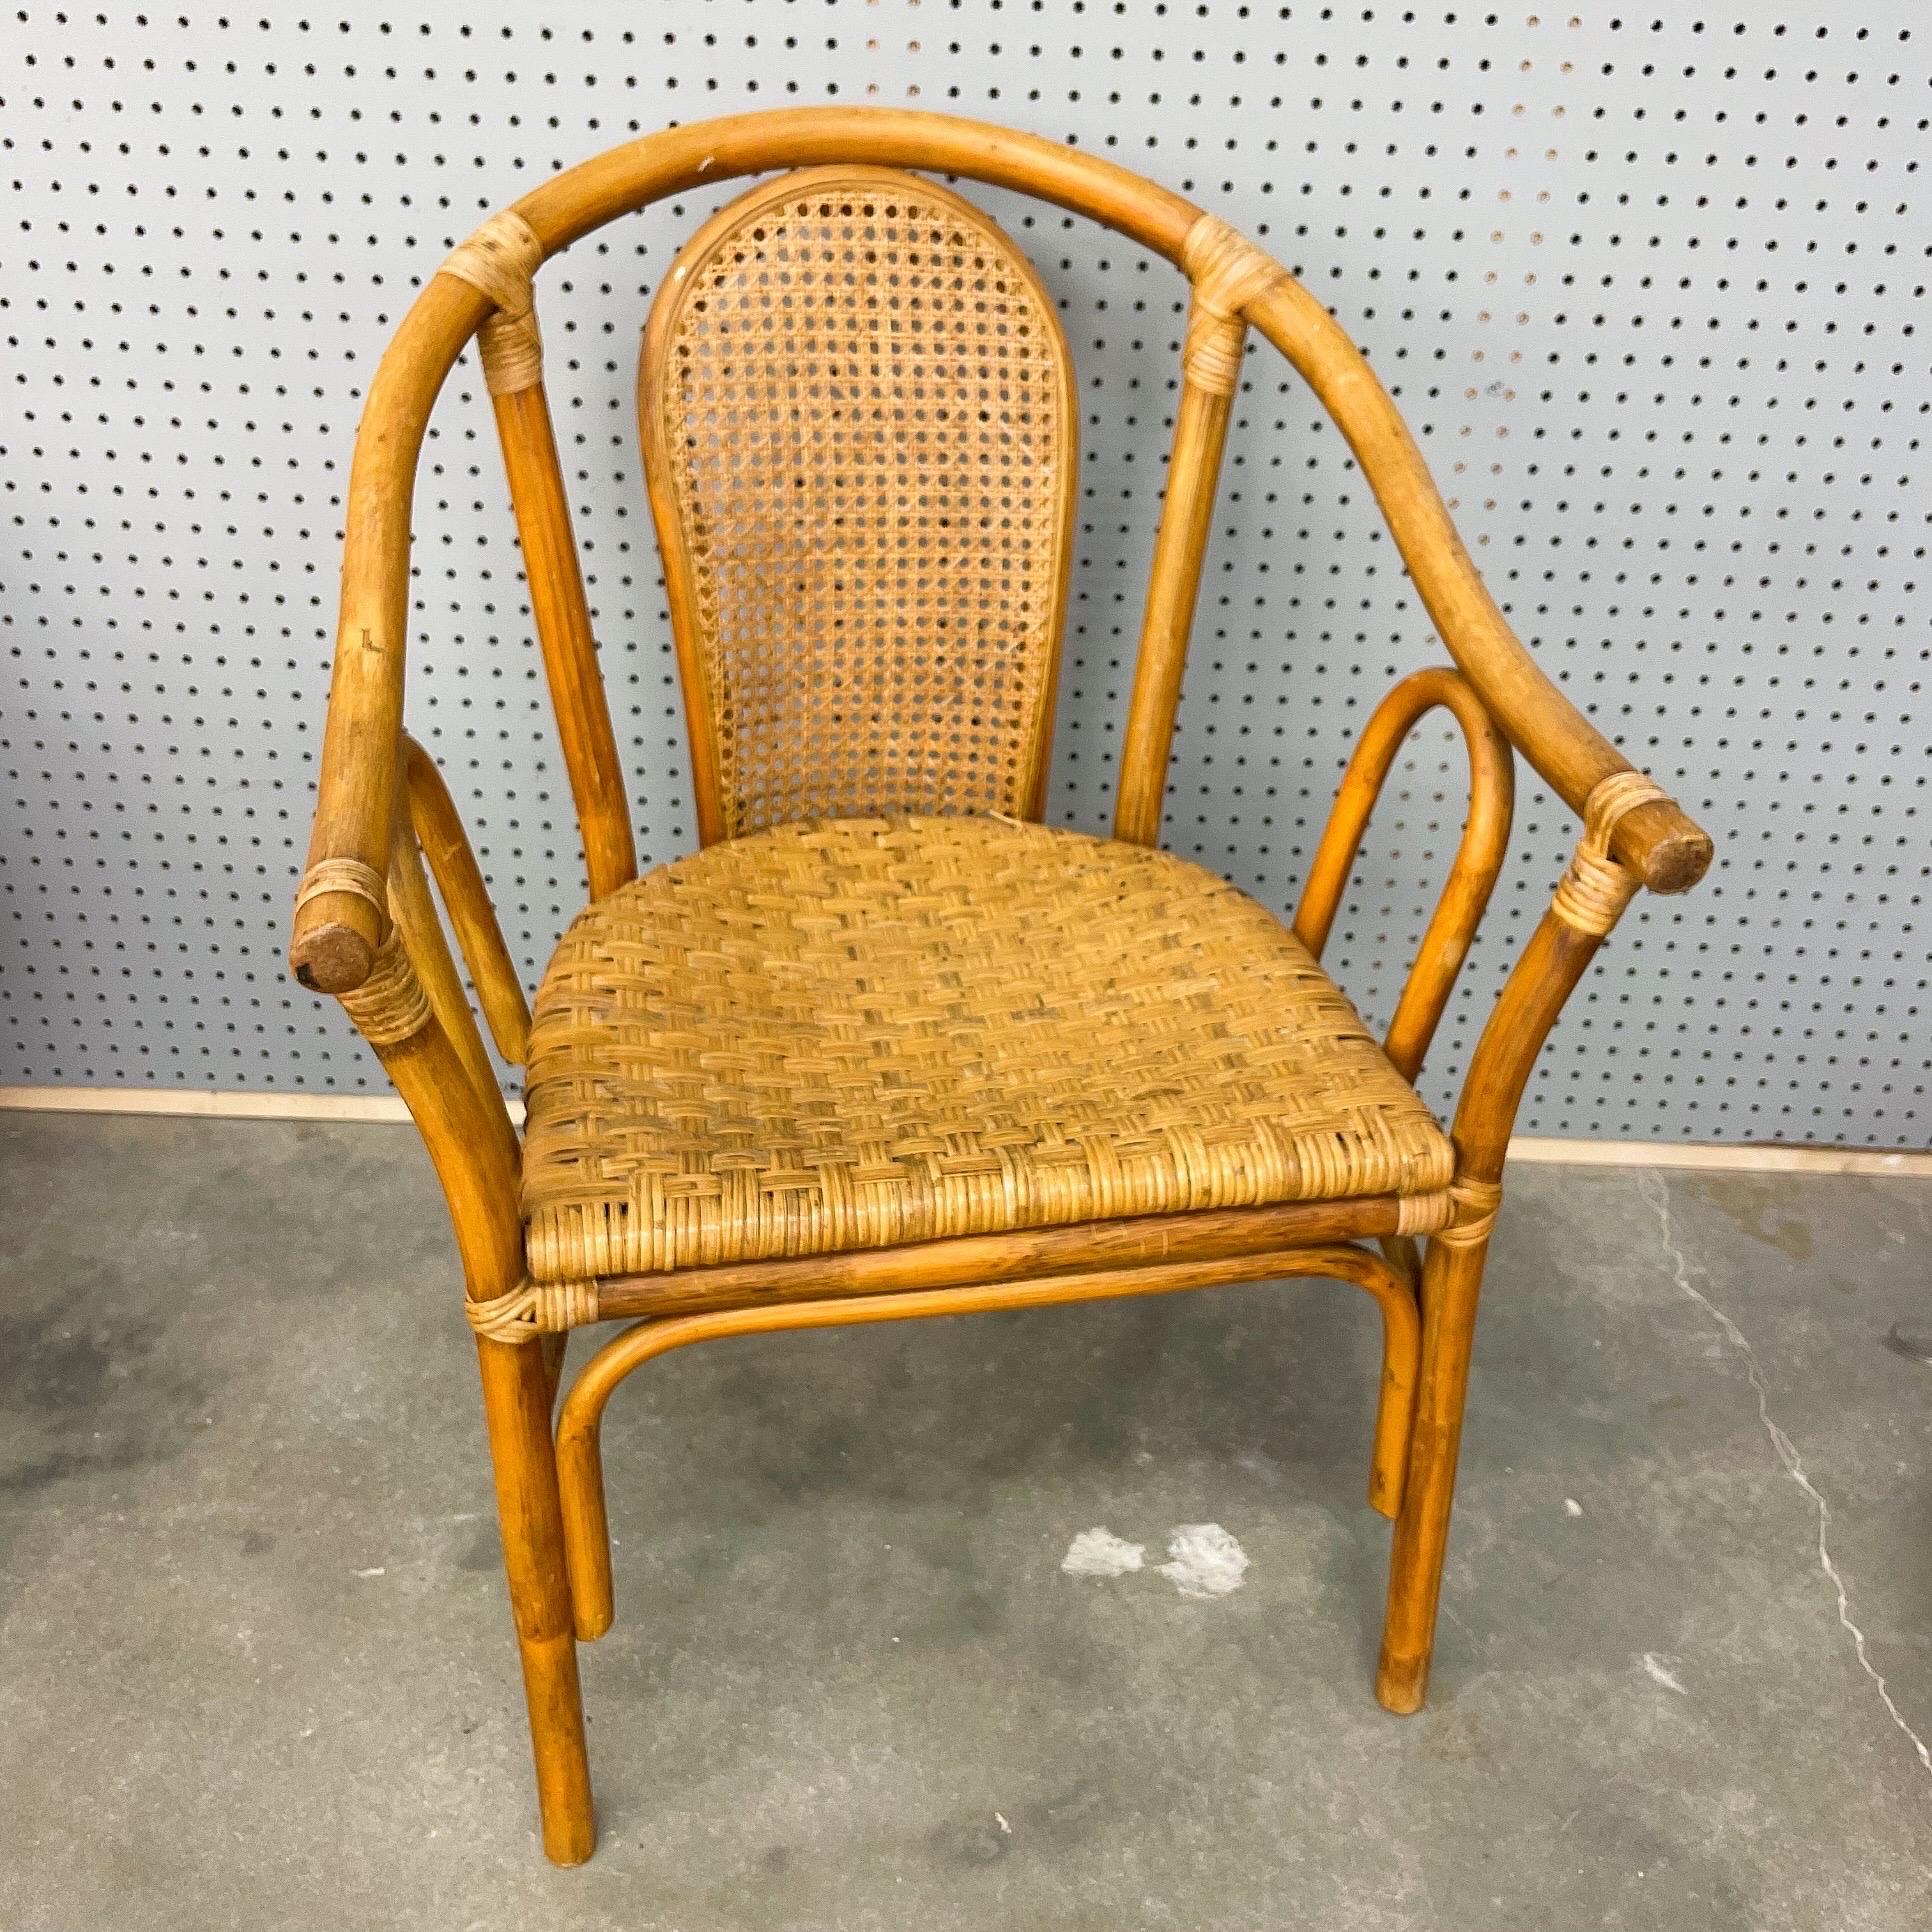 Mid 20th Century Bamboo Rattan Dining Chairs With Cane Inset Back - Set of 4 In Good Condition For Sale In Cookeville, TN